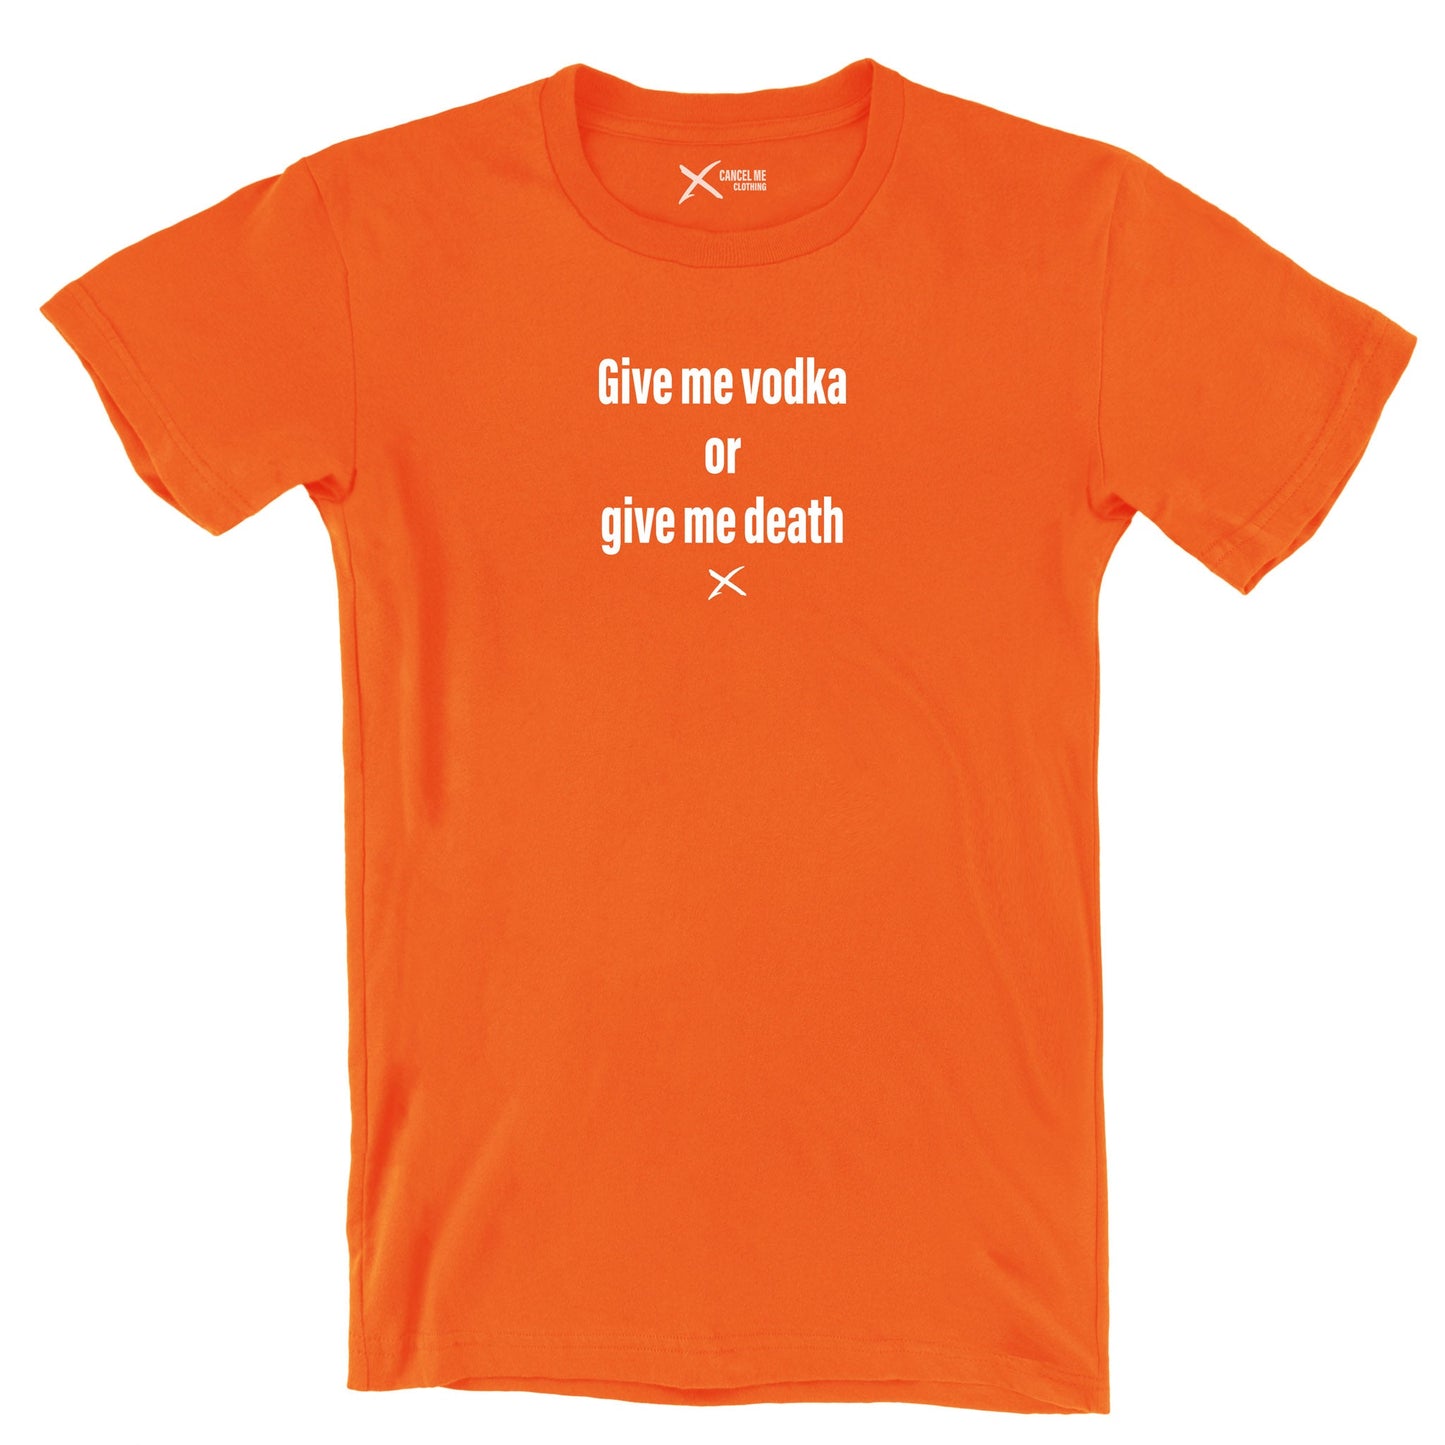 Give me vodka or give me death - Shirt